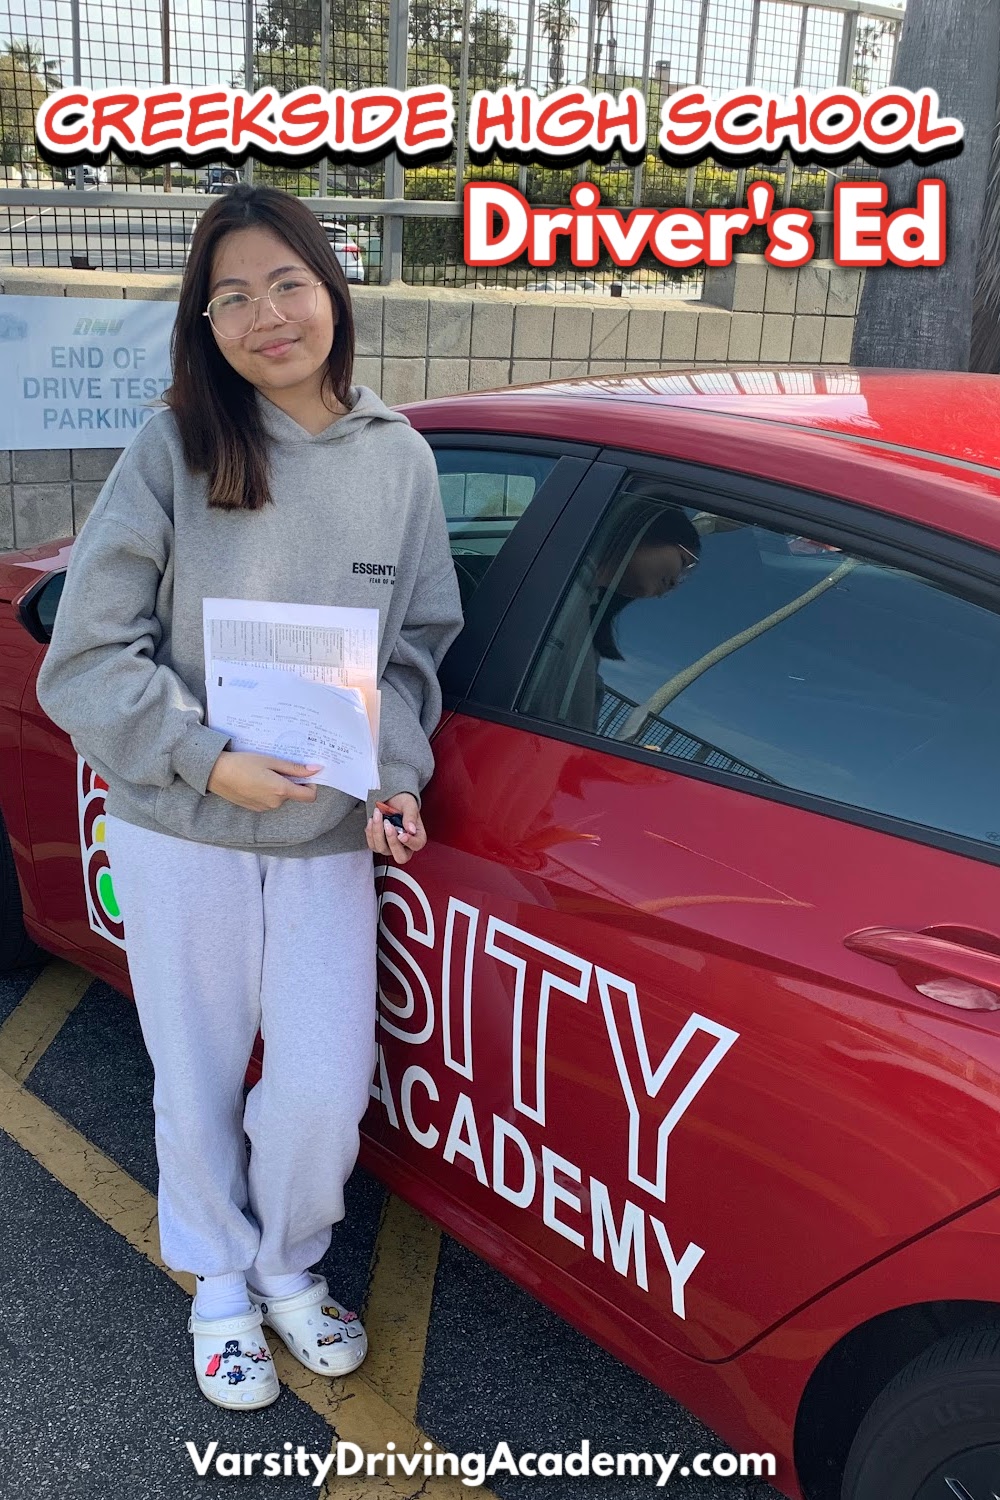 Varsity Driving Academy offers the best Creekside High School driver's education, where students learn how to get a license and drive safely.